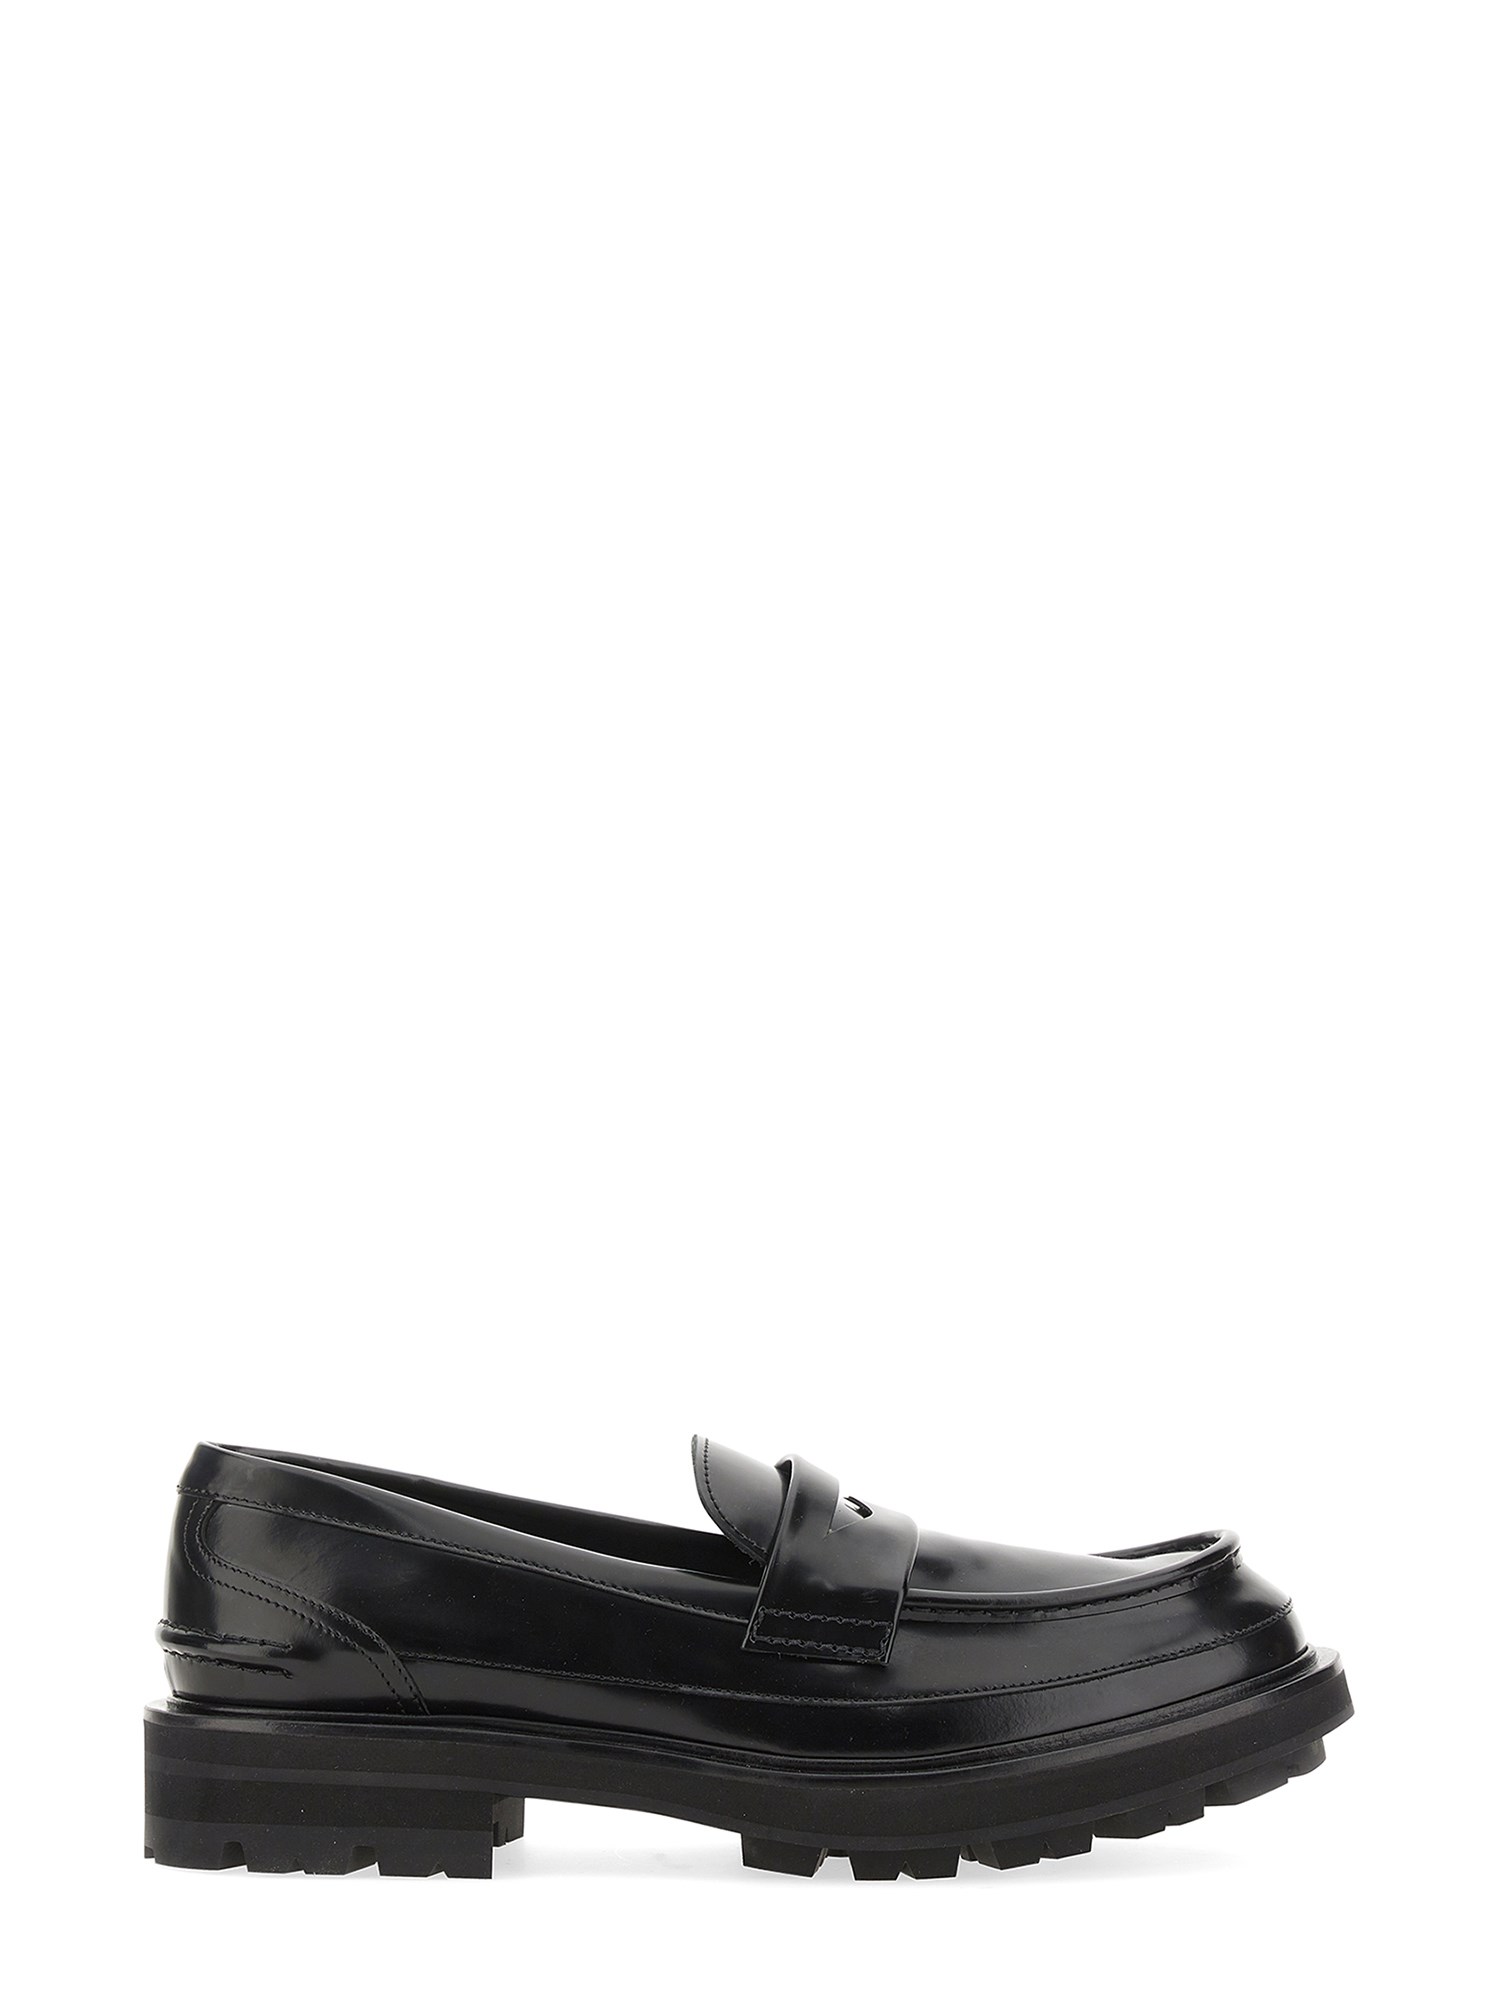 alexander mcqueen leather loafer